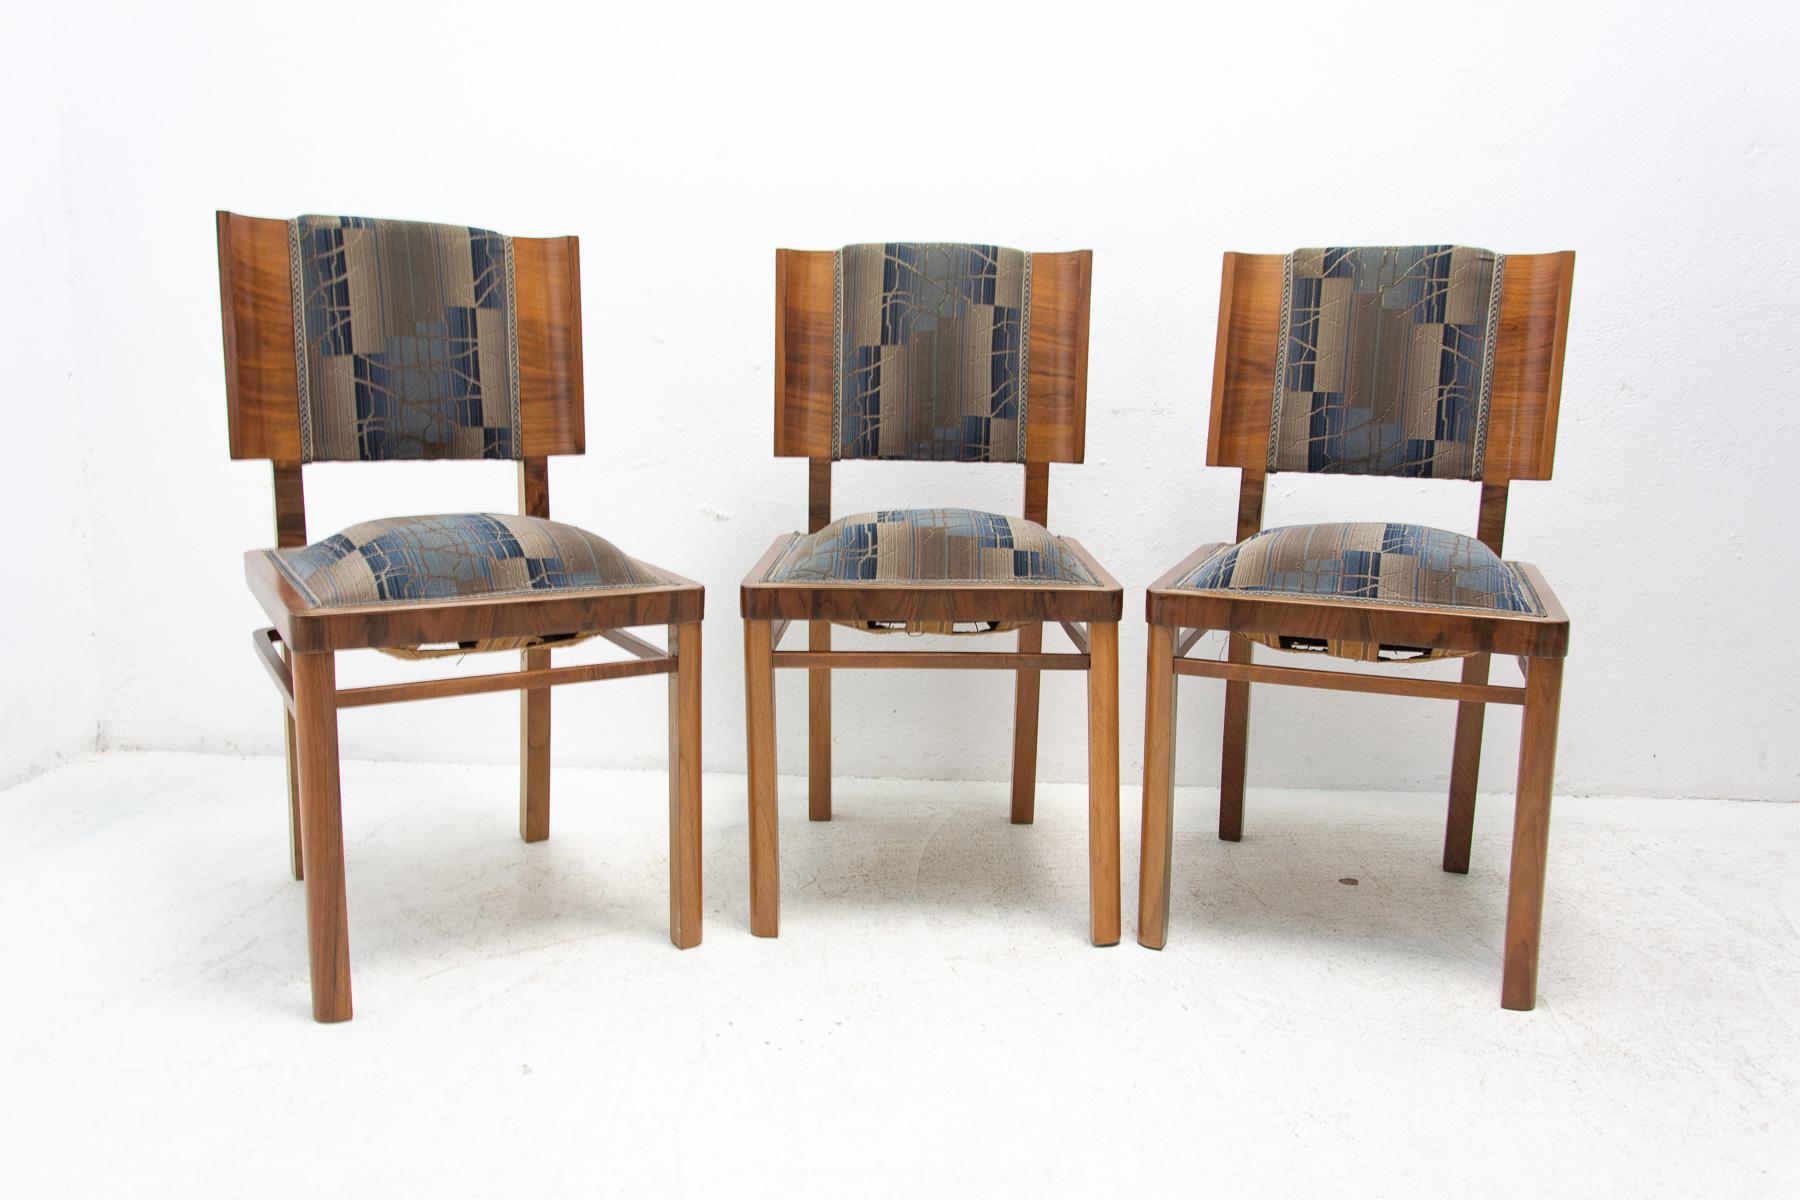 ART DECO chairs, made in the 1930s in the former Czechoslovakia. Made of walnut wood, veneered. The veneer is in excellent condition. The seats are slightly raised due to age, but they are comfortable. On one chair, the fabric is sewn up, as you can